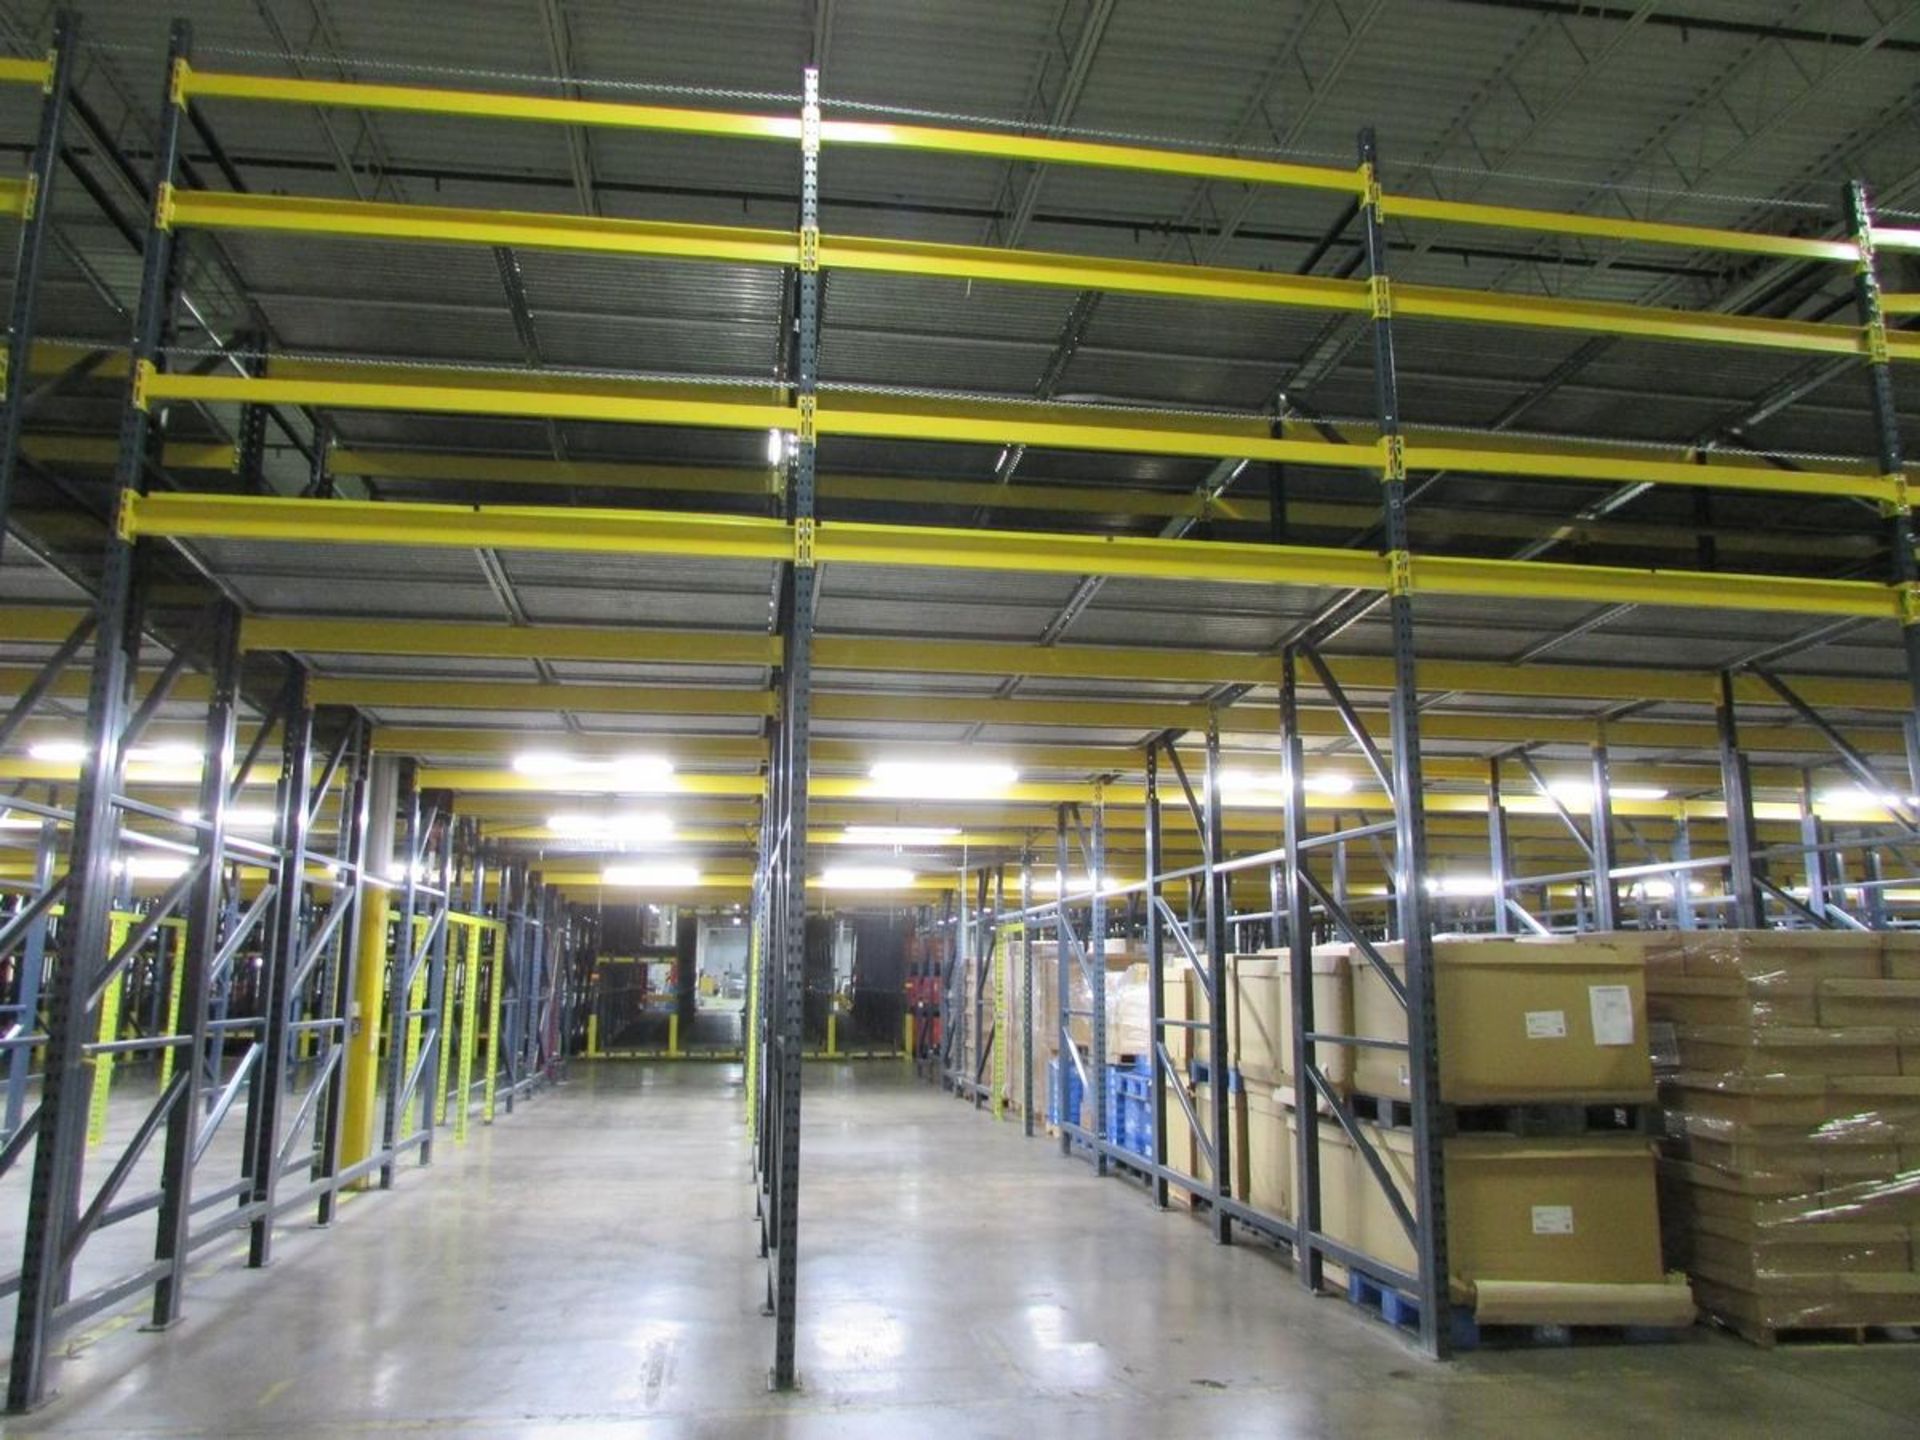 (30) Sections of Adjustable Gravity Flow Pallet Racking - Image 5 of 6